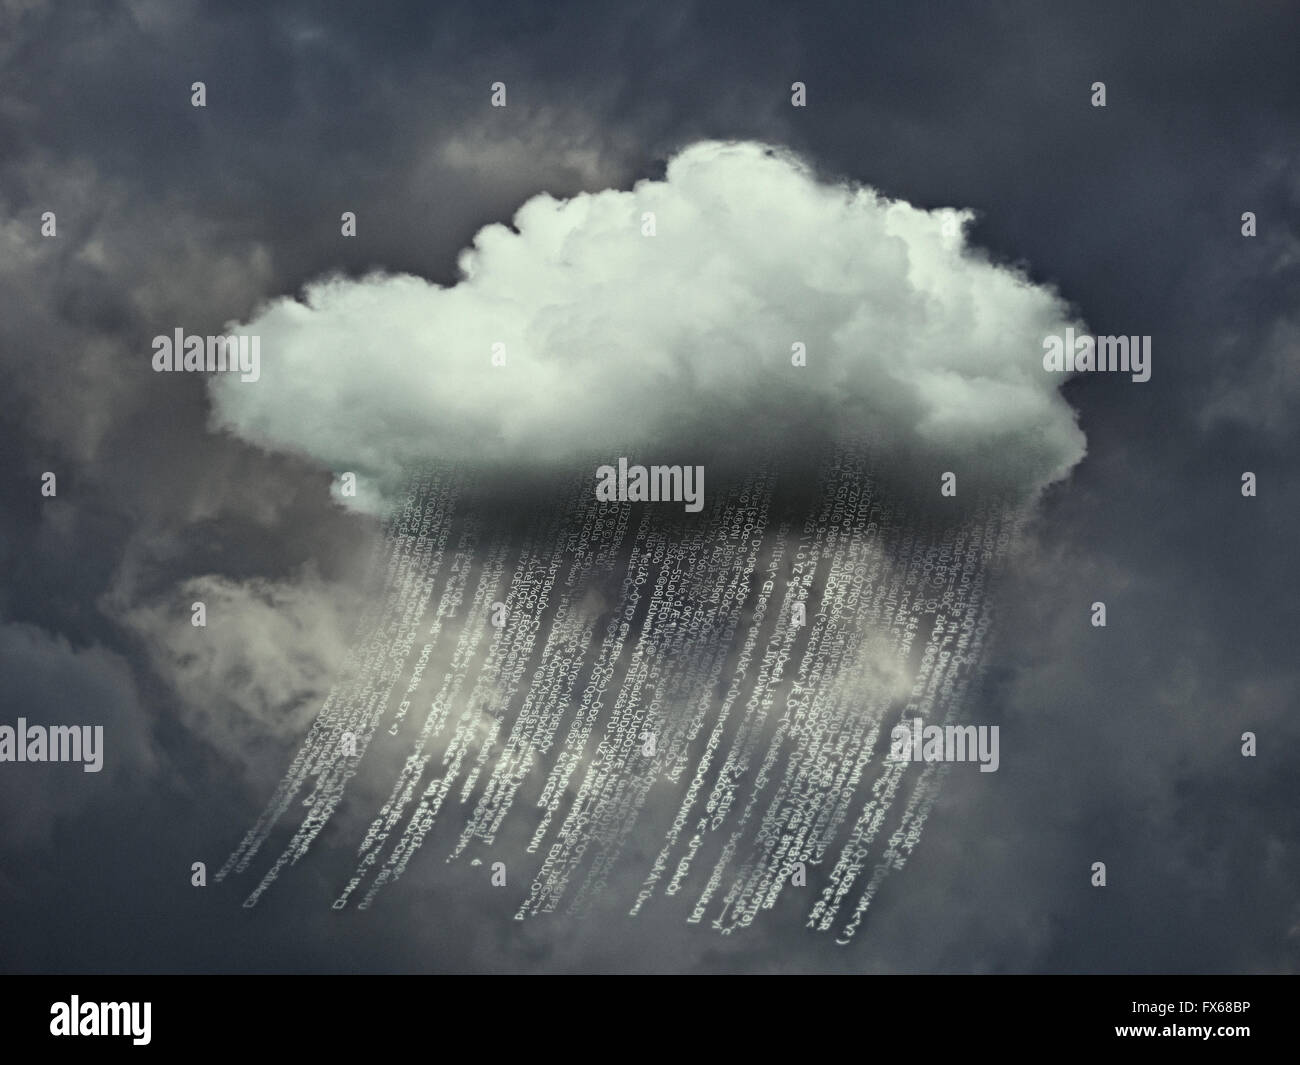 Data lines raining from storm cloud Stock Photo